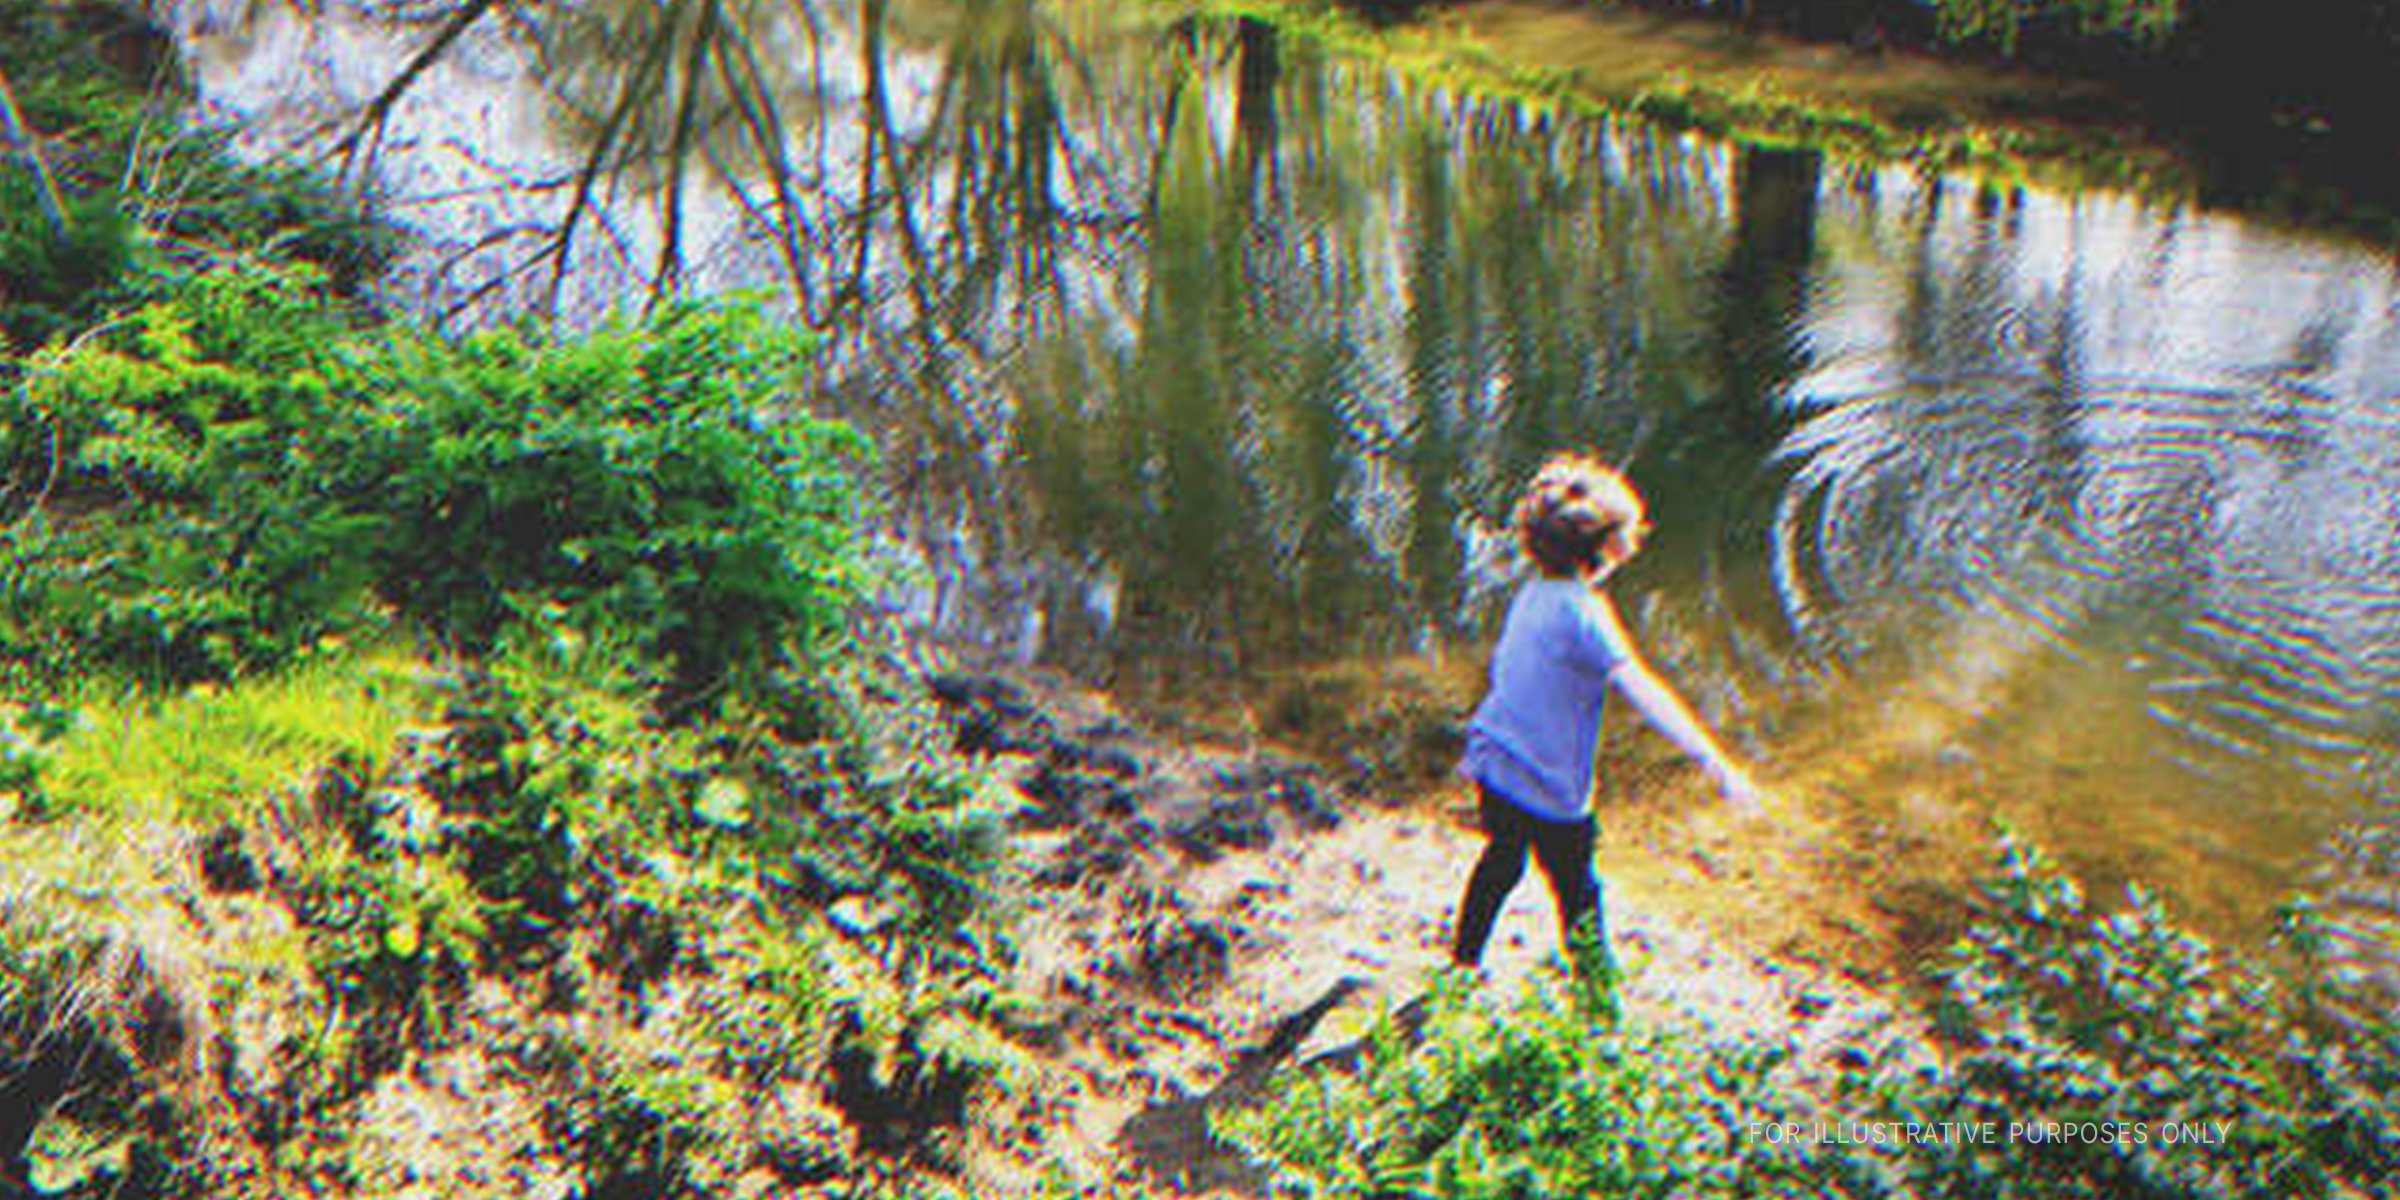 A little boy playing by a pond | Source: Shutterstock